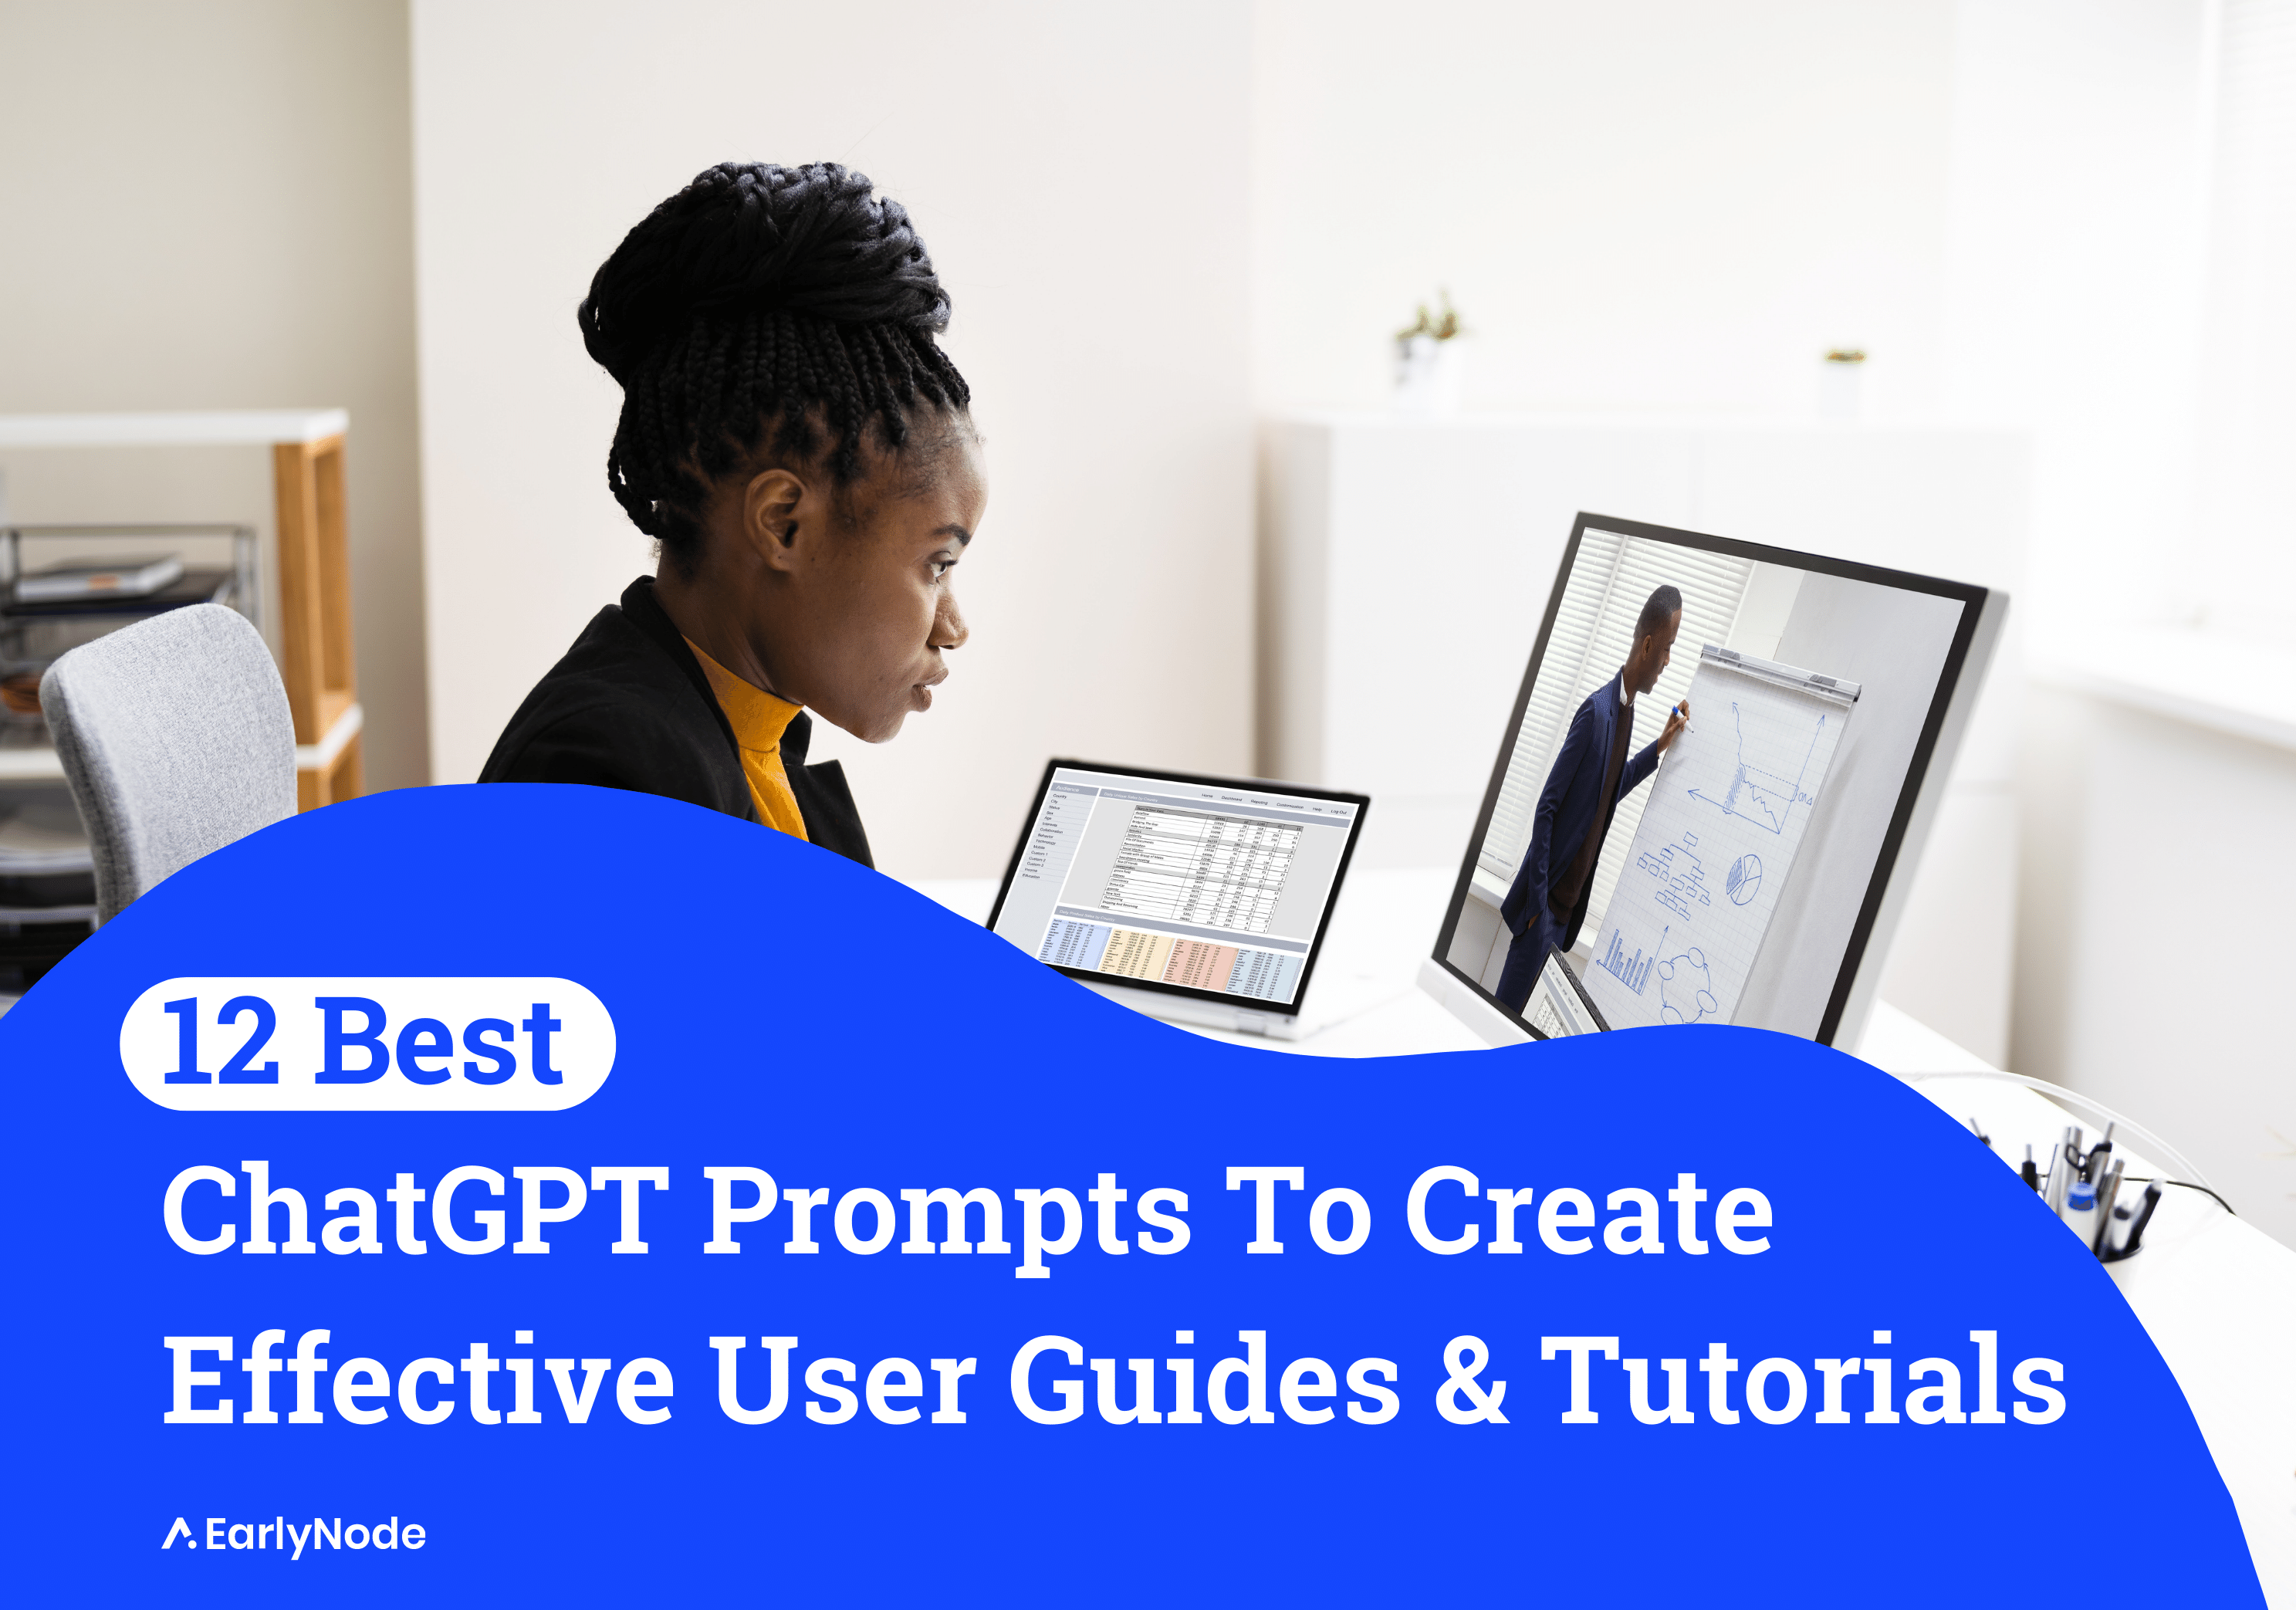 12 ChatGPT Prompts To Create Effective User Guides & Tutorials